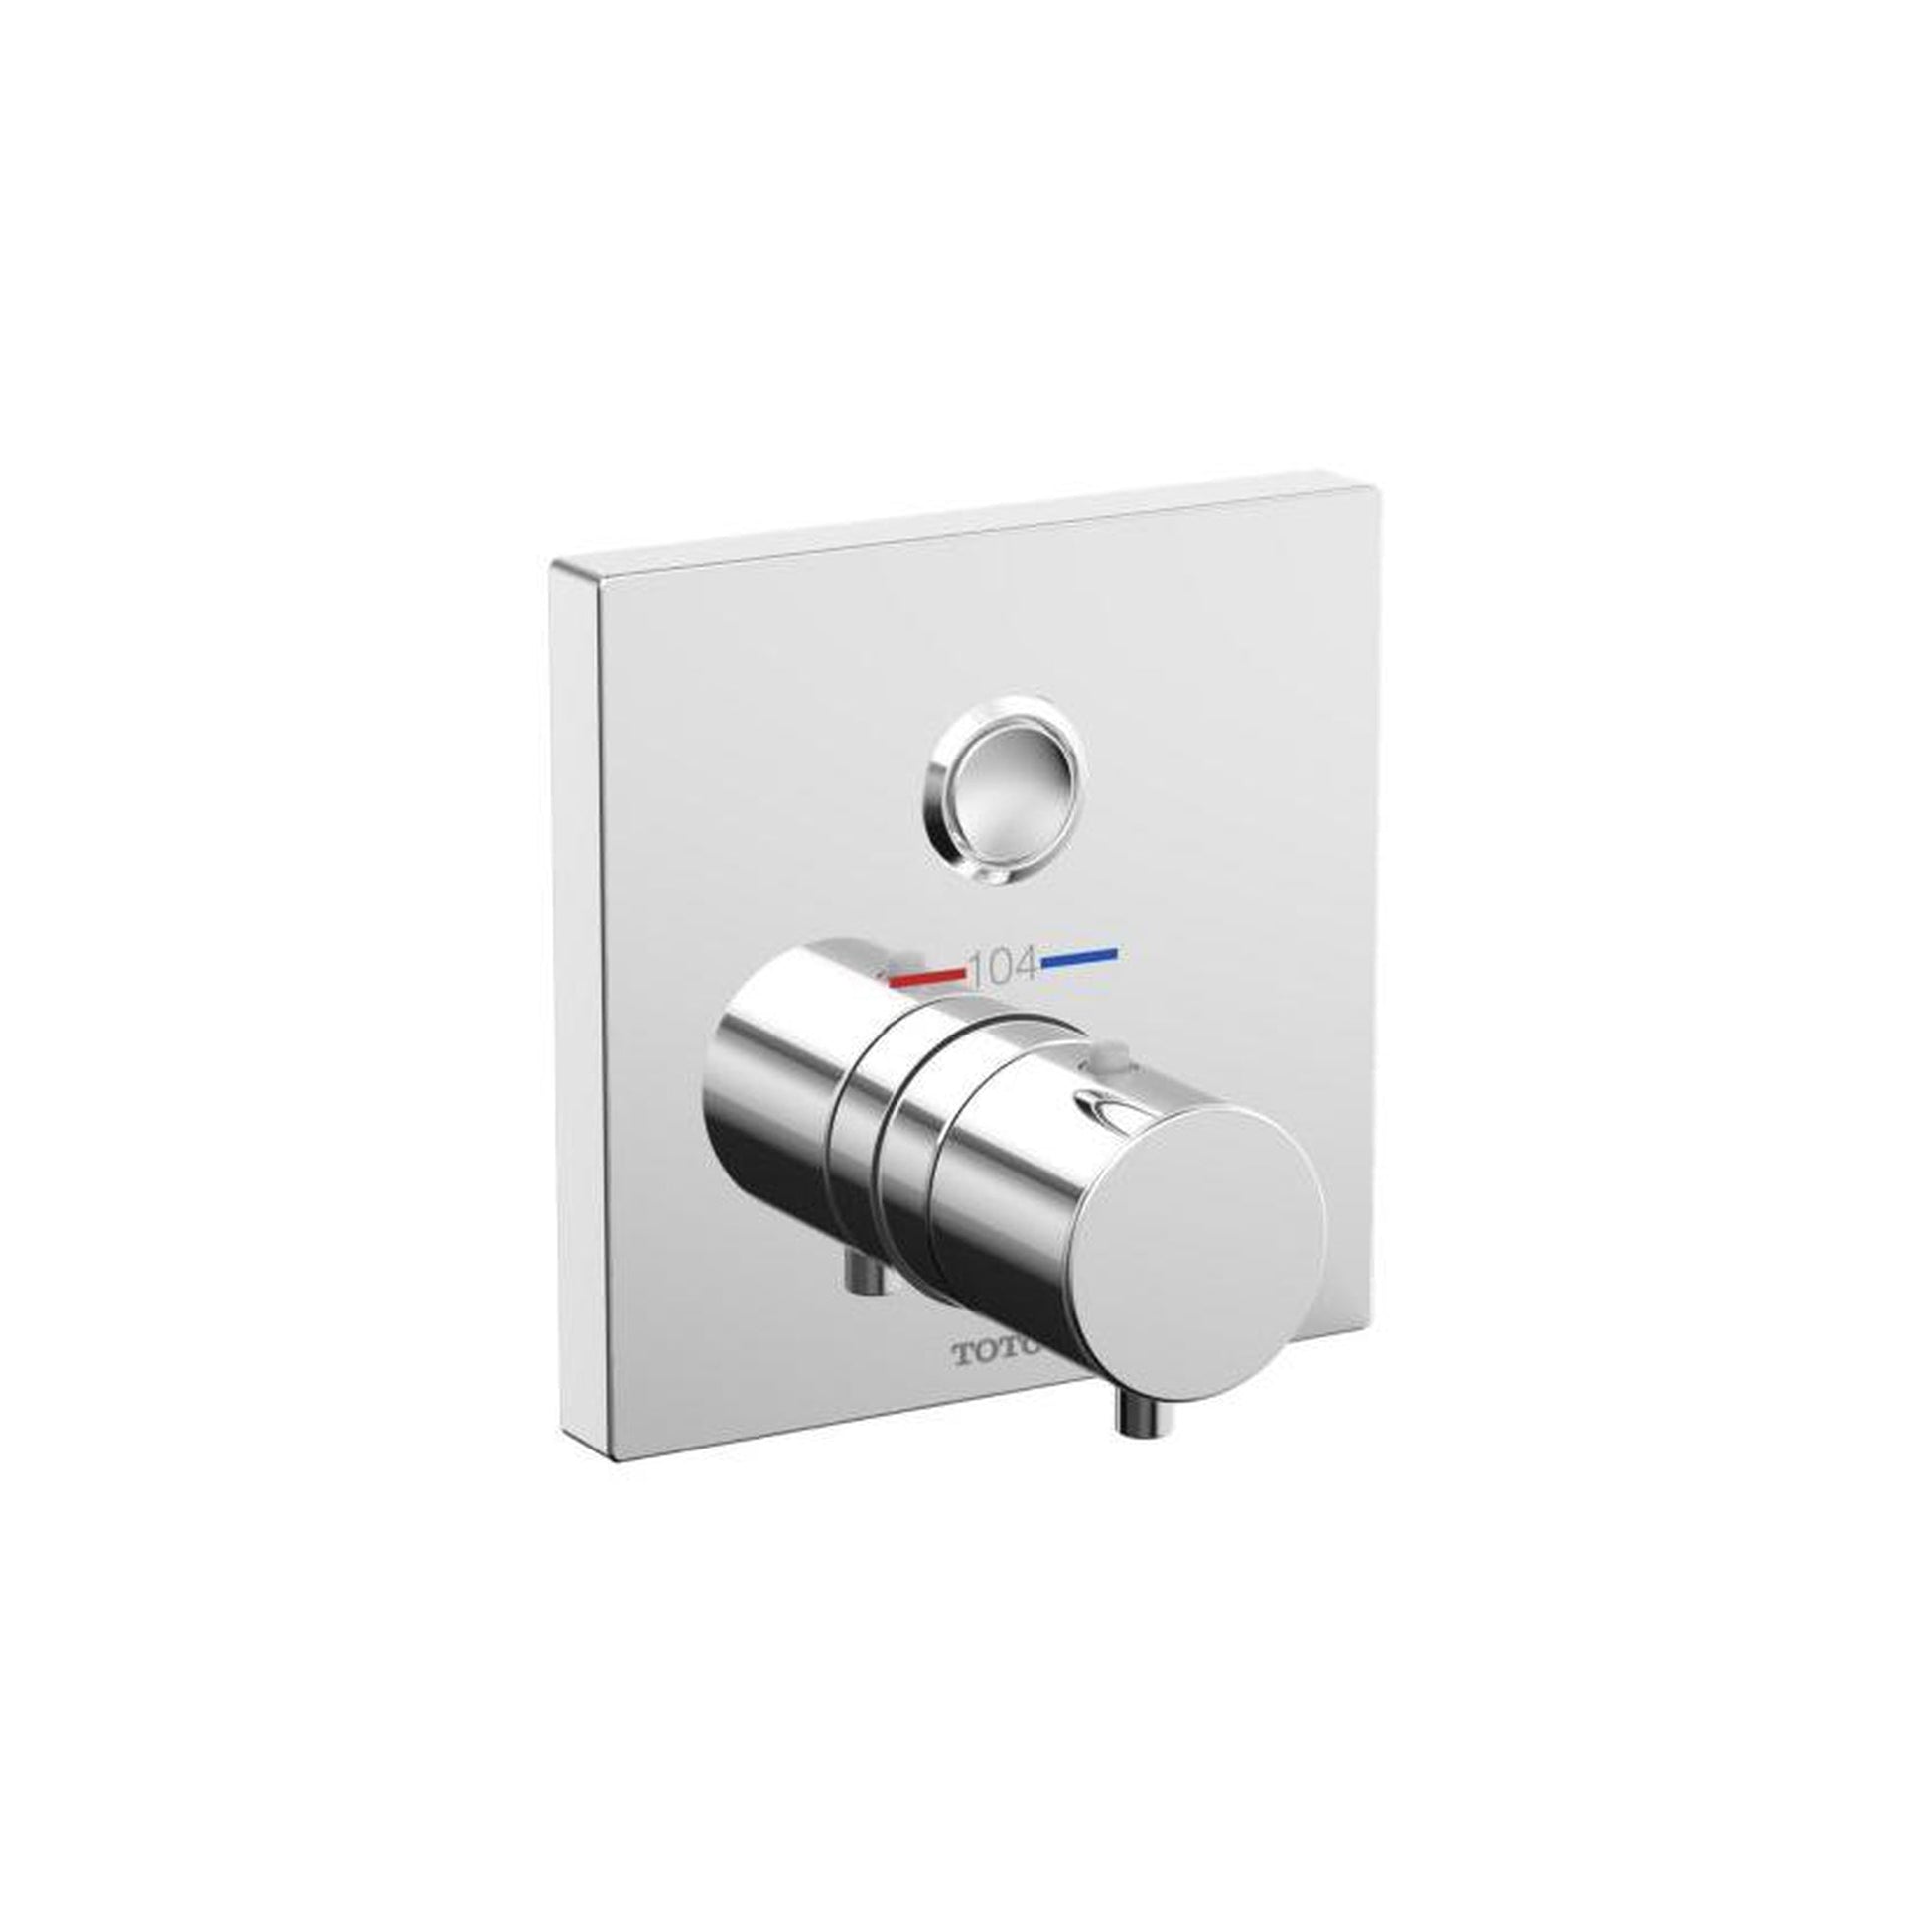 Toto Thermo 1WAY Polished Chrome Push Button Valve